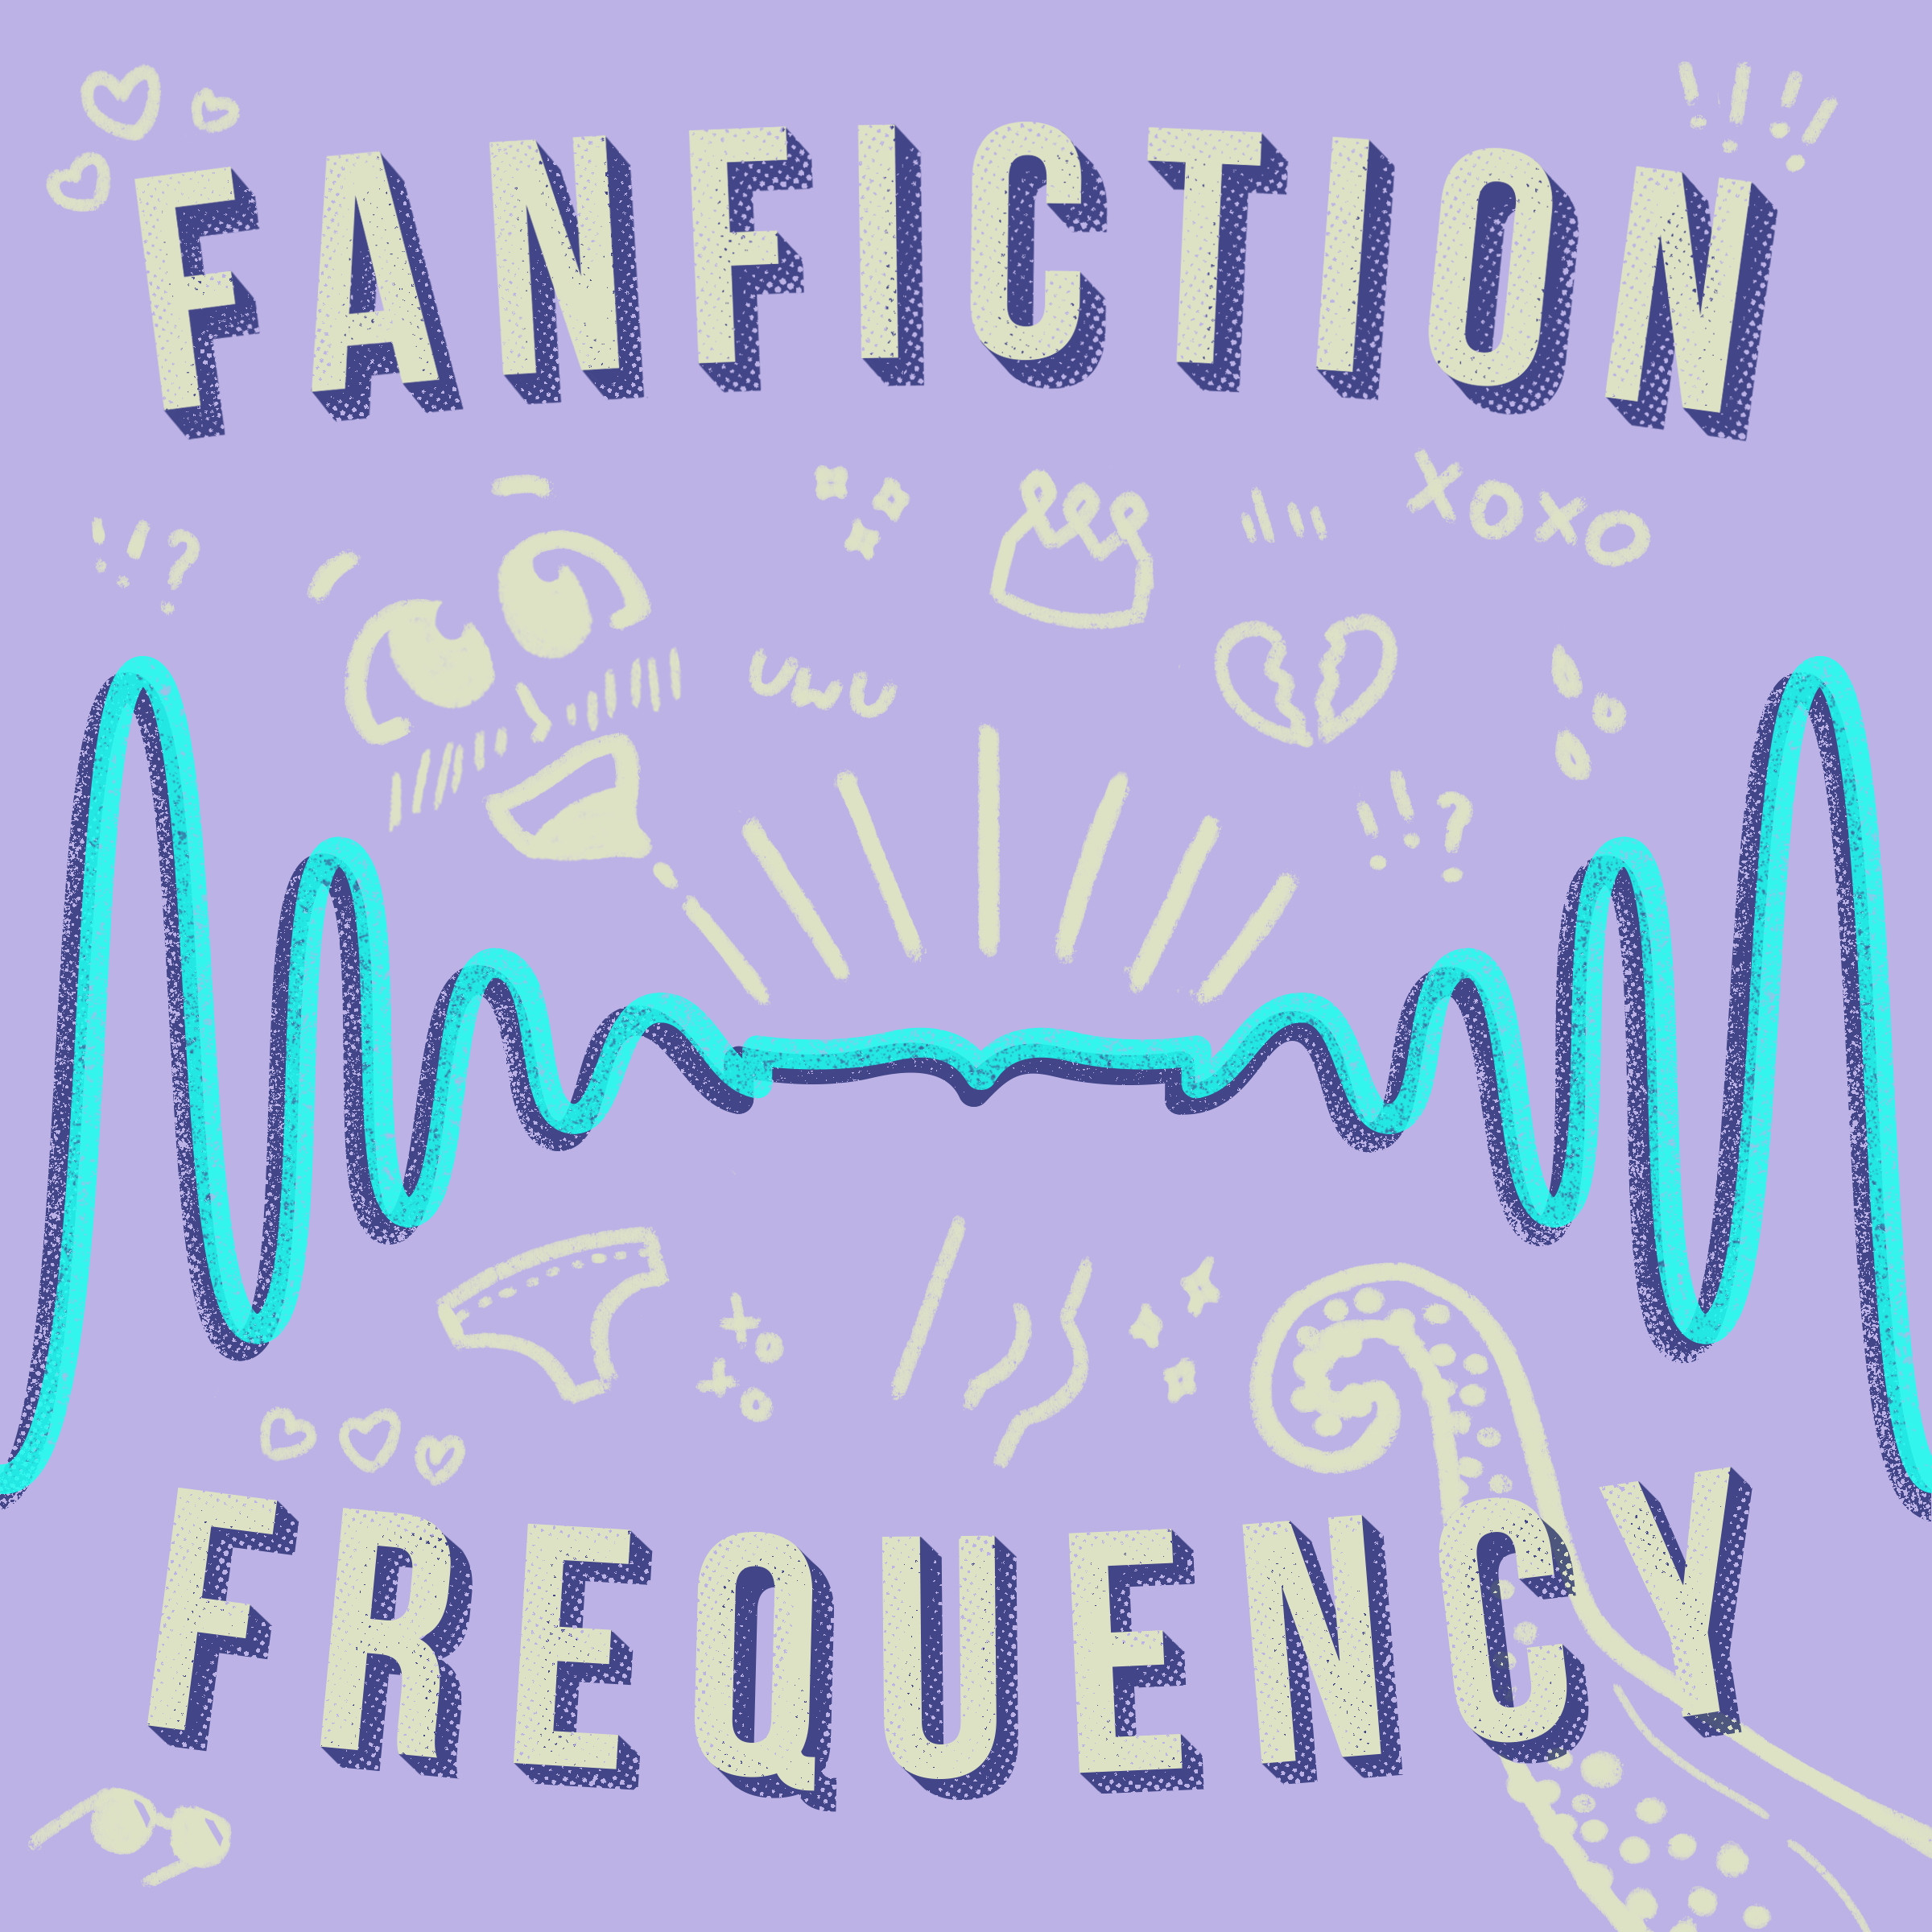 Illustration for a podcast cover about reading saucy fanfiction called Fanfiction Frequency. Meant to look like an open book inside a sound wave.